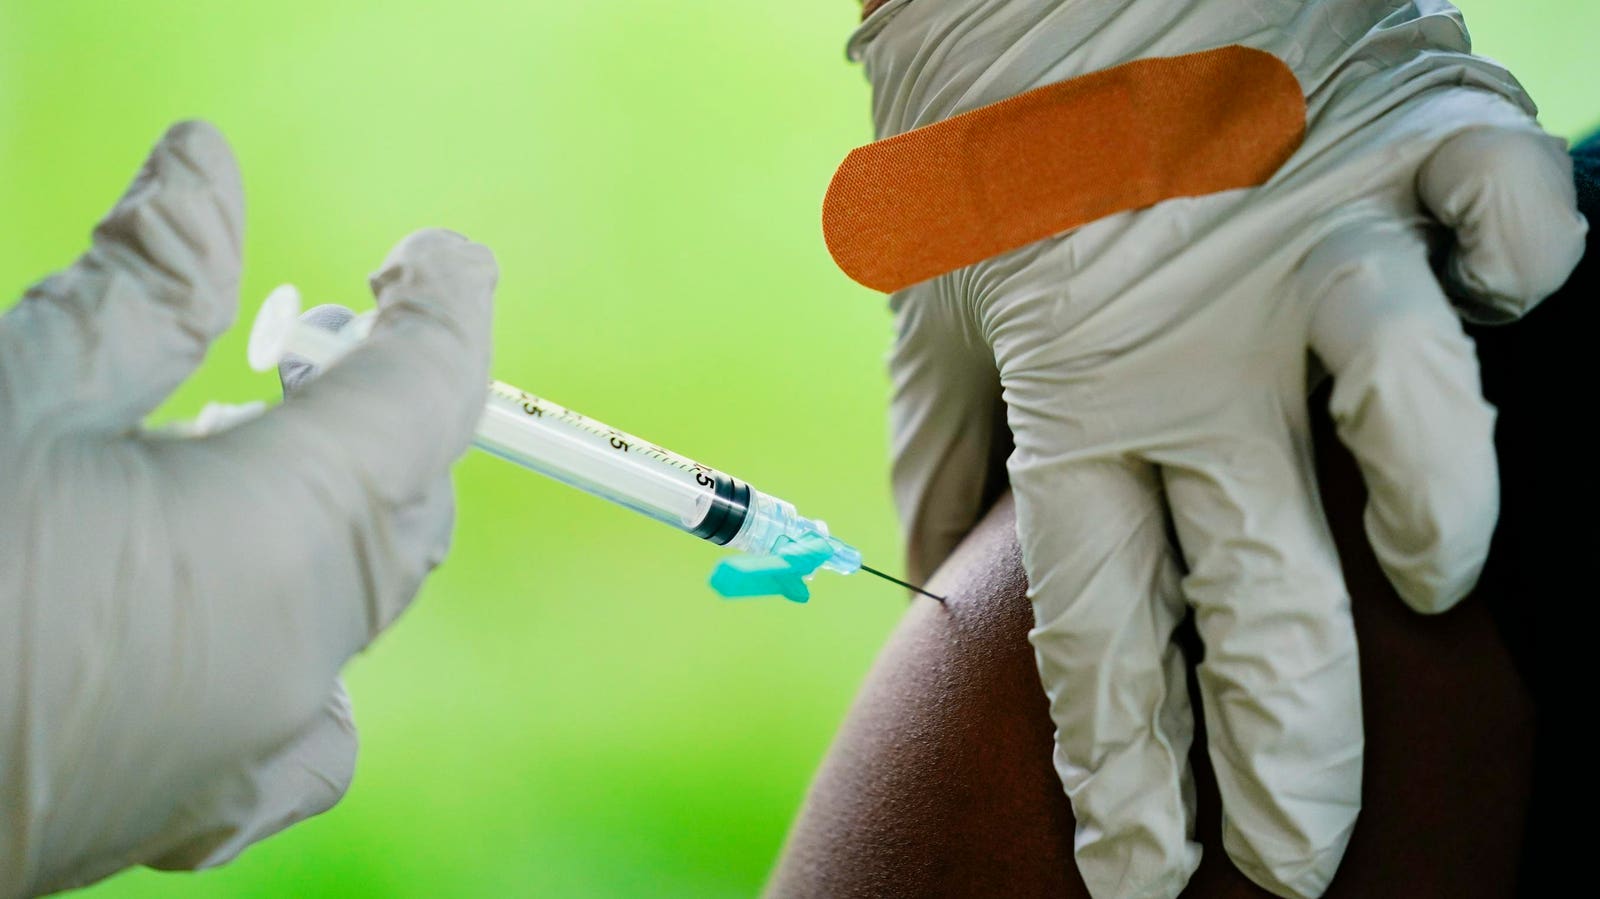 Florida Surgeon General Calls For Halt In Covid MRNA Vaccines—Citing Debunked Concerns